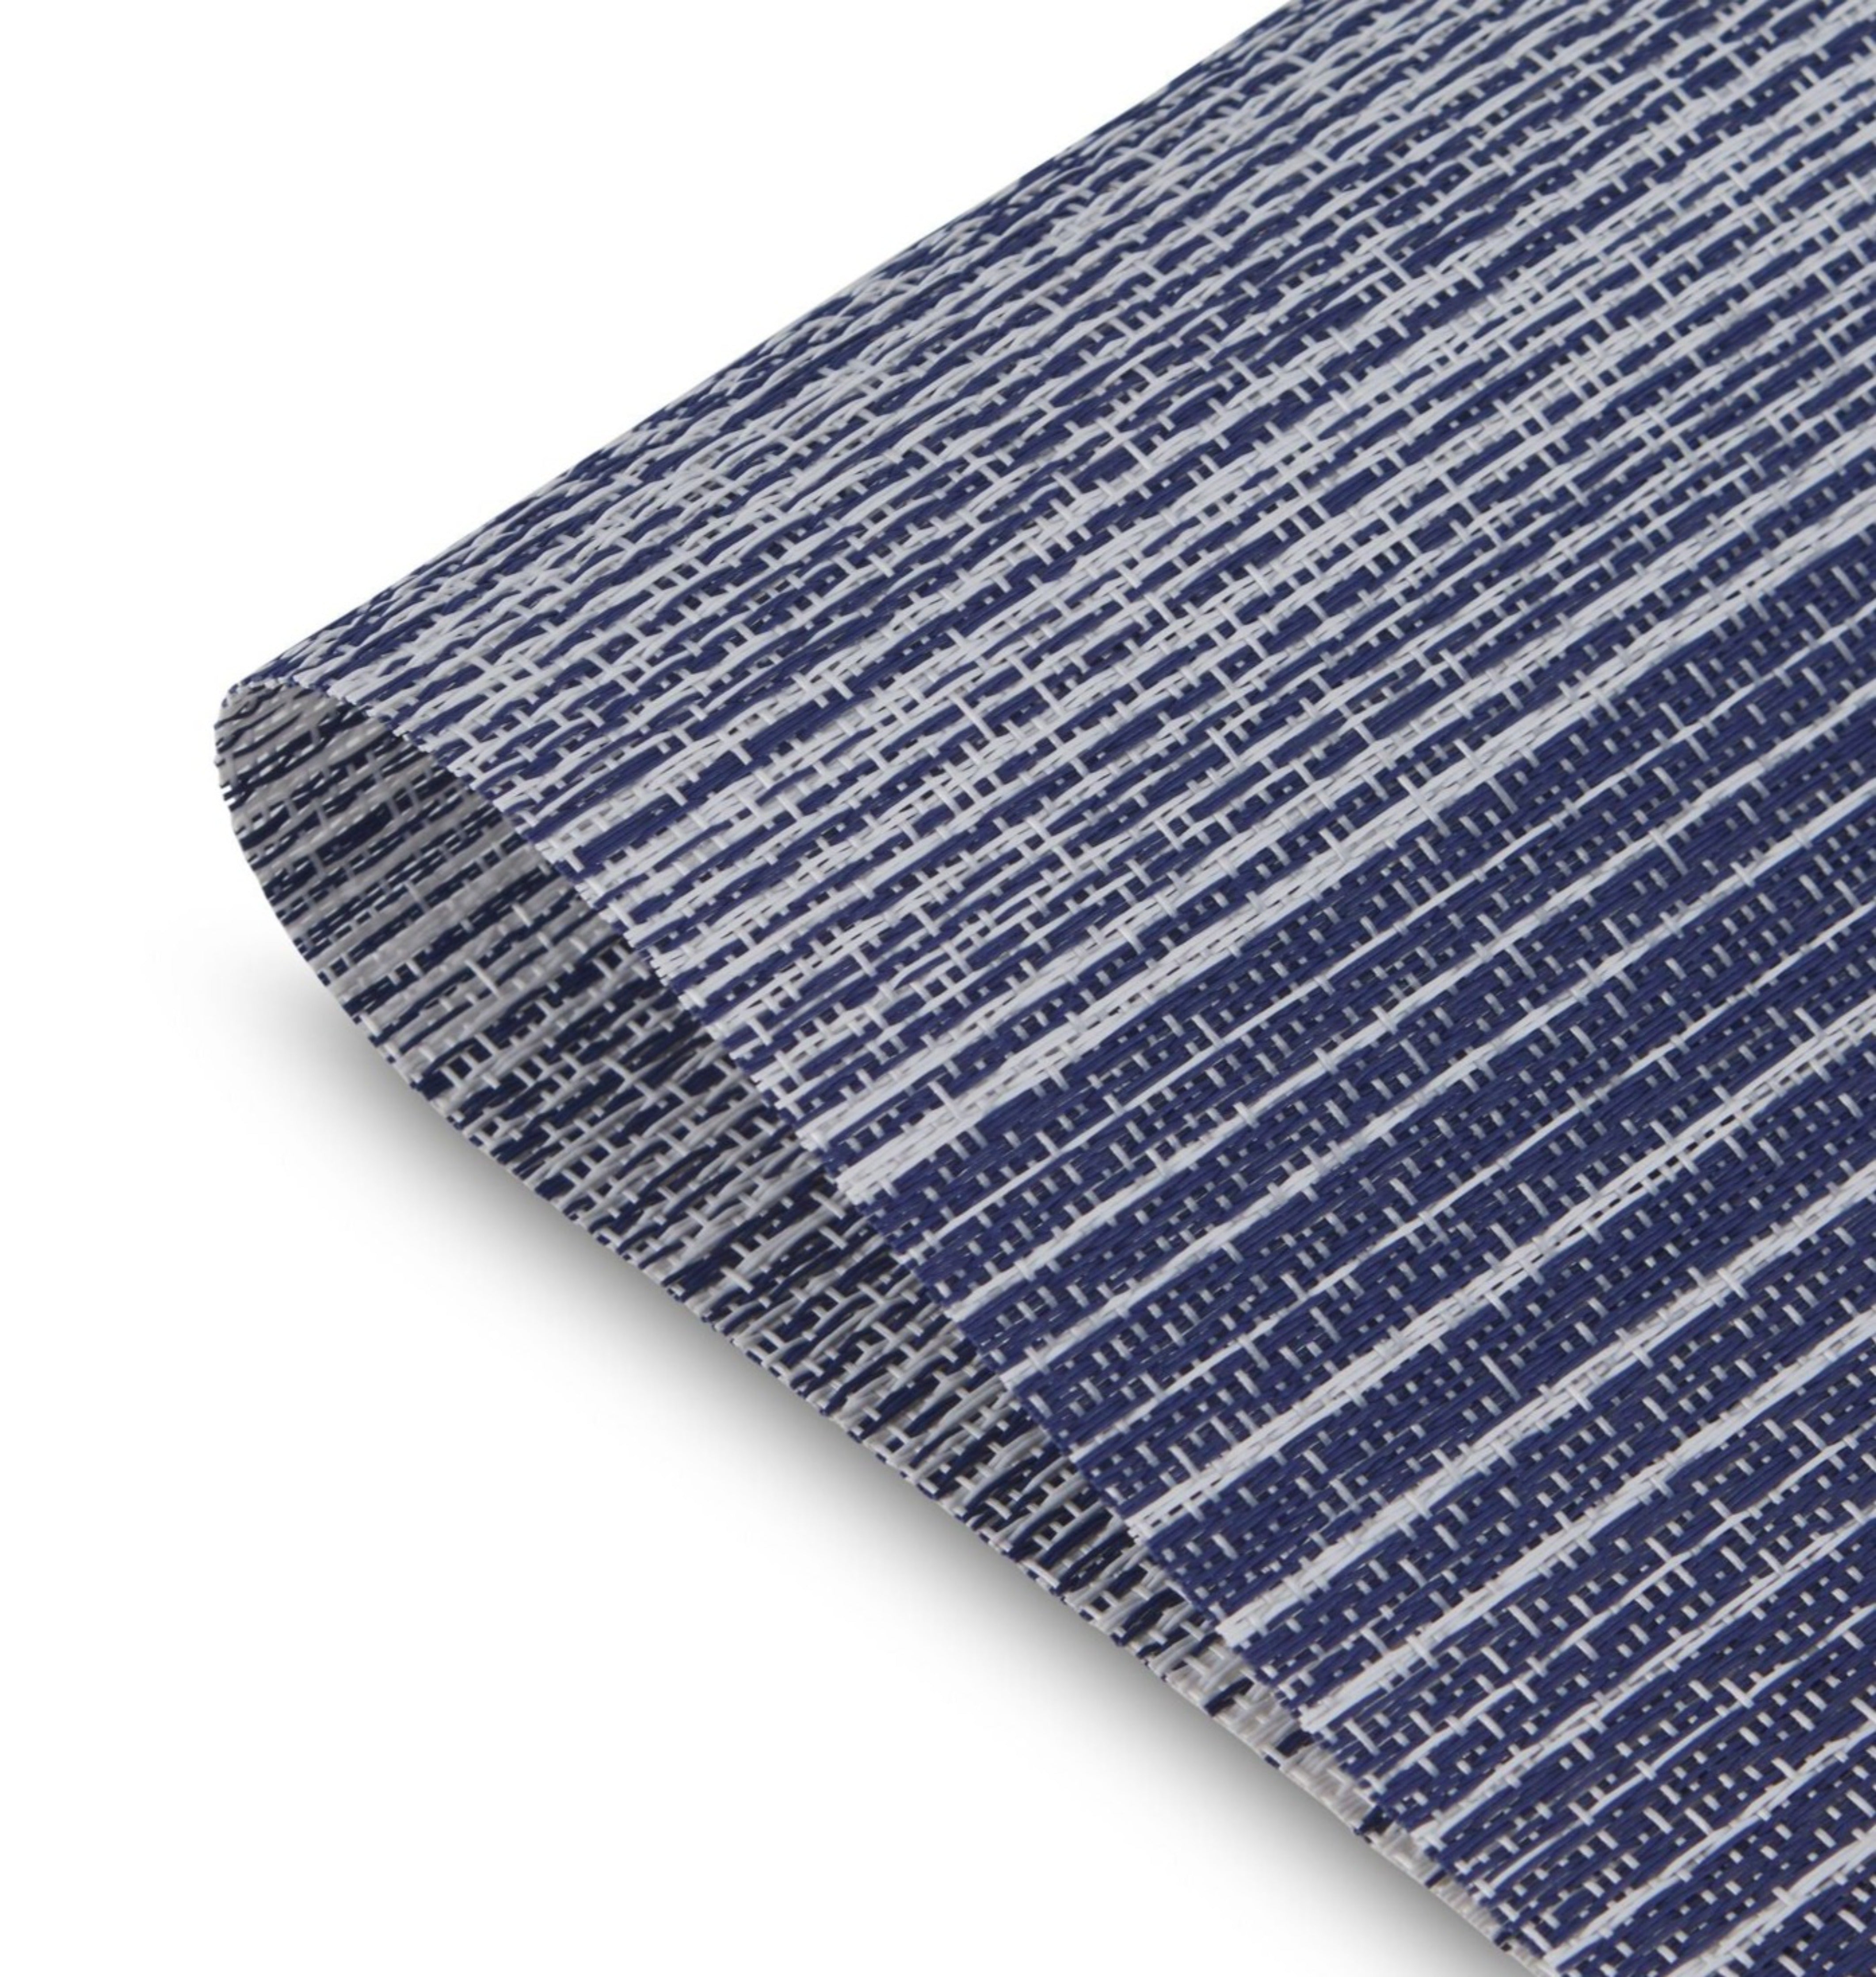 Dainty Home Norwich Woven Texteline Textured Design Reversible 12" x 18" Rectangular Placemats Set of 6